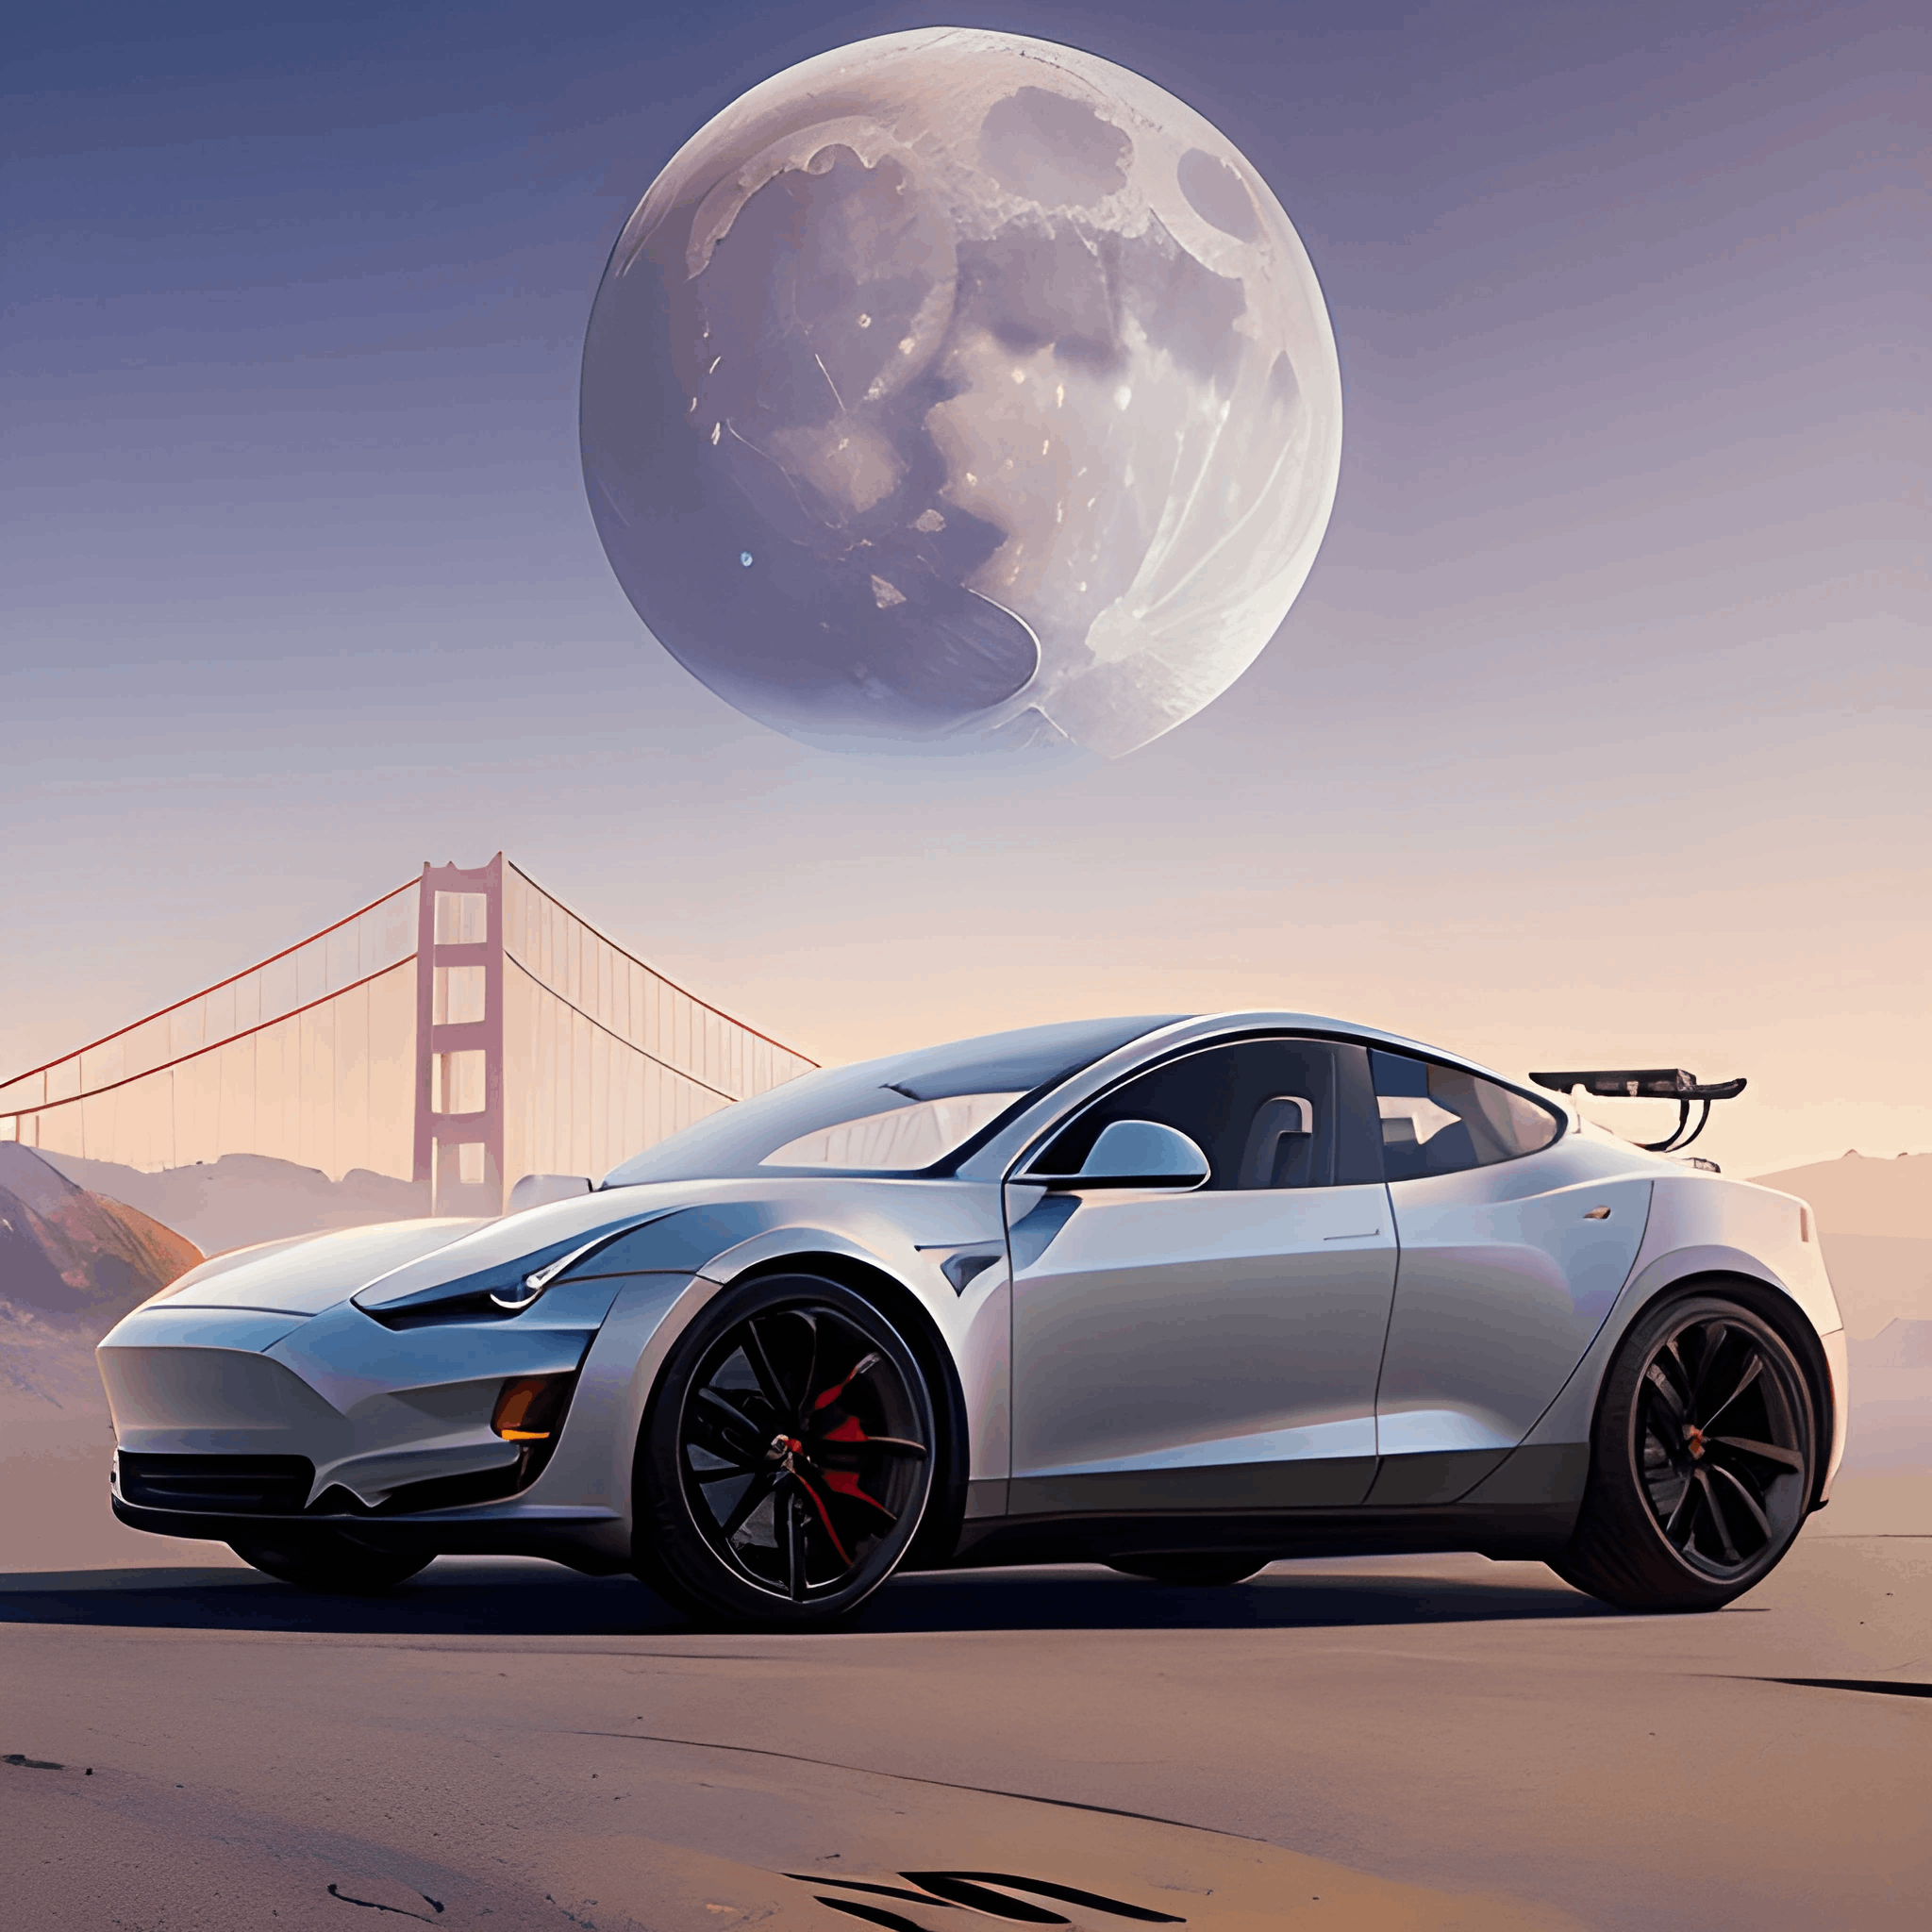 silver tesla car with a bridge in the background